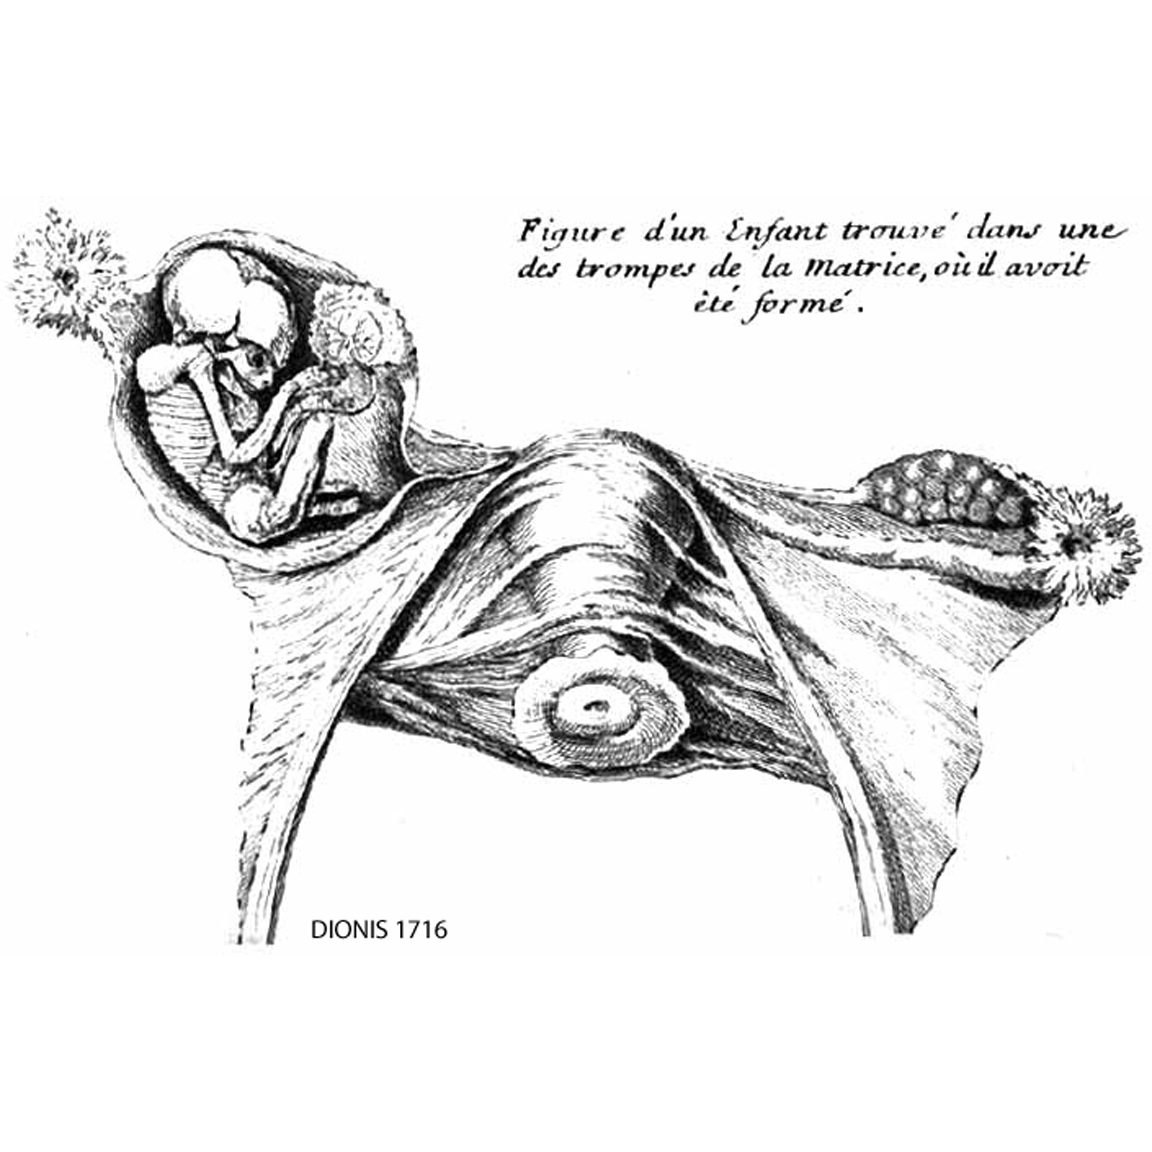 1716 DIONIS: right tubal ectopic